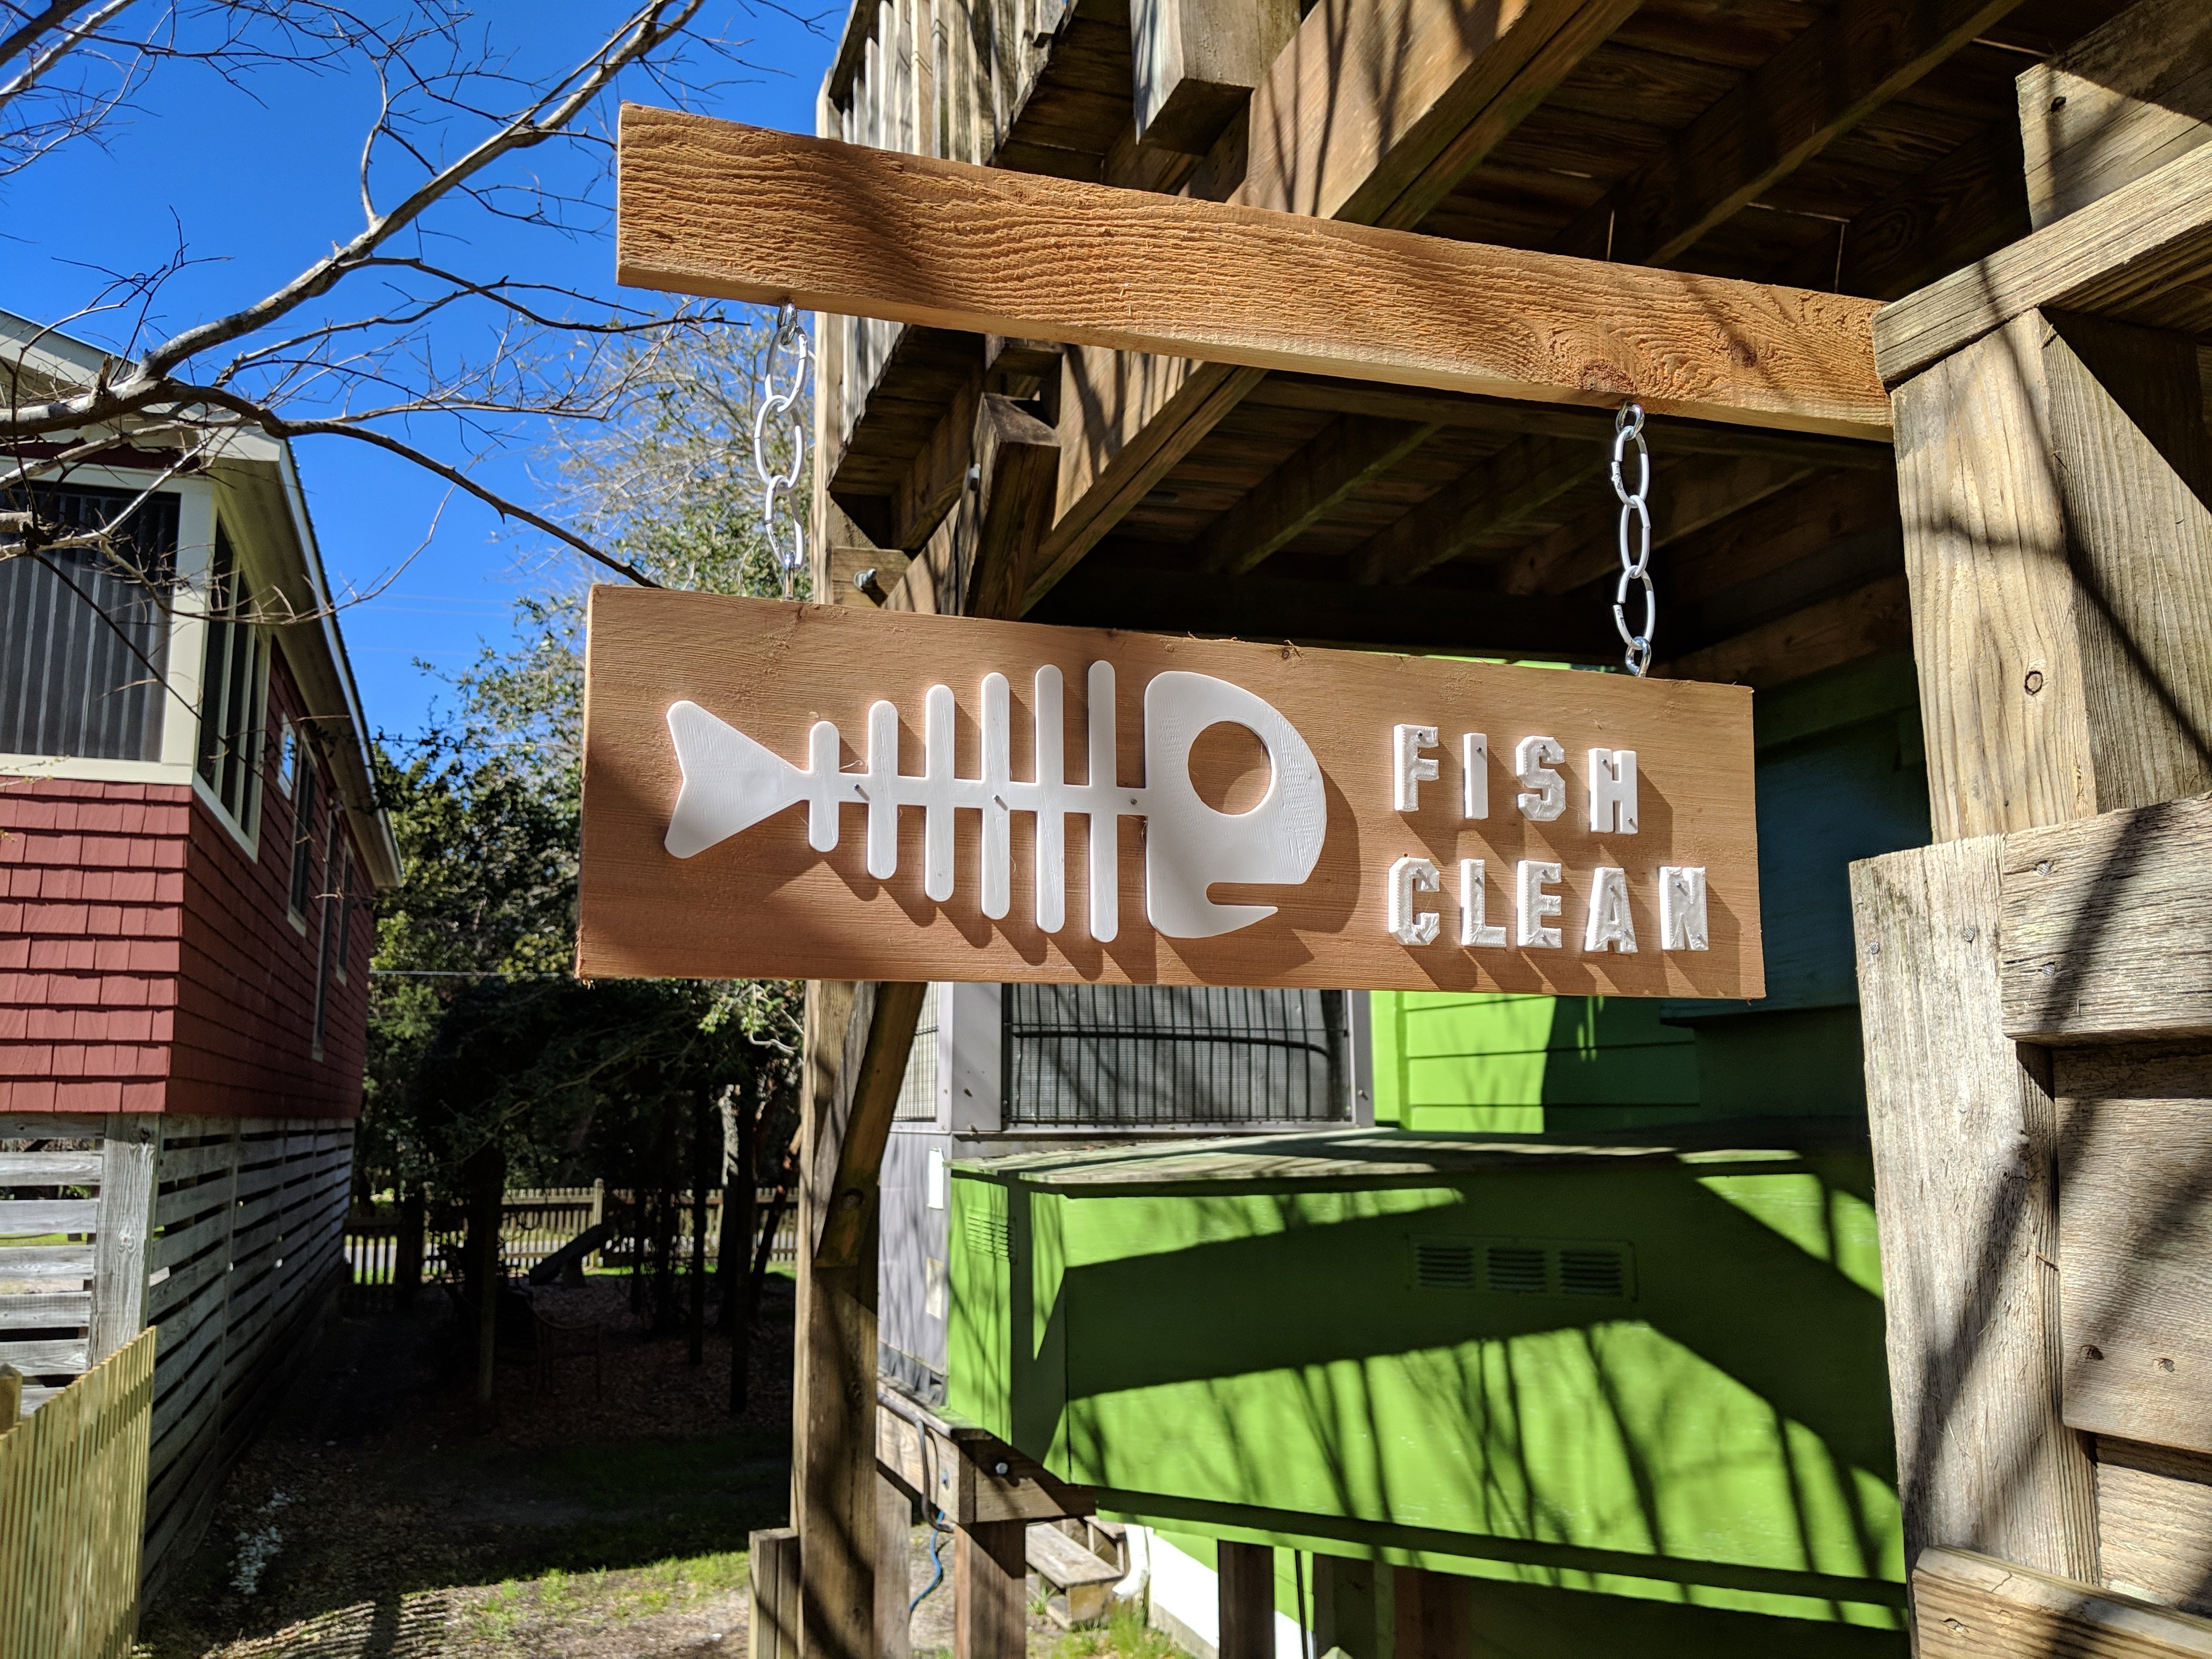 SV34 fish clean sign owner